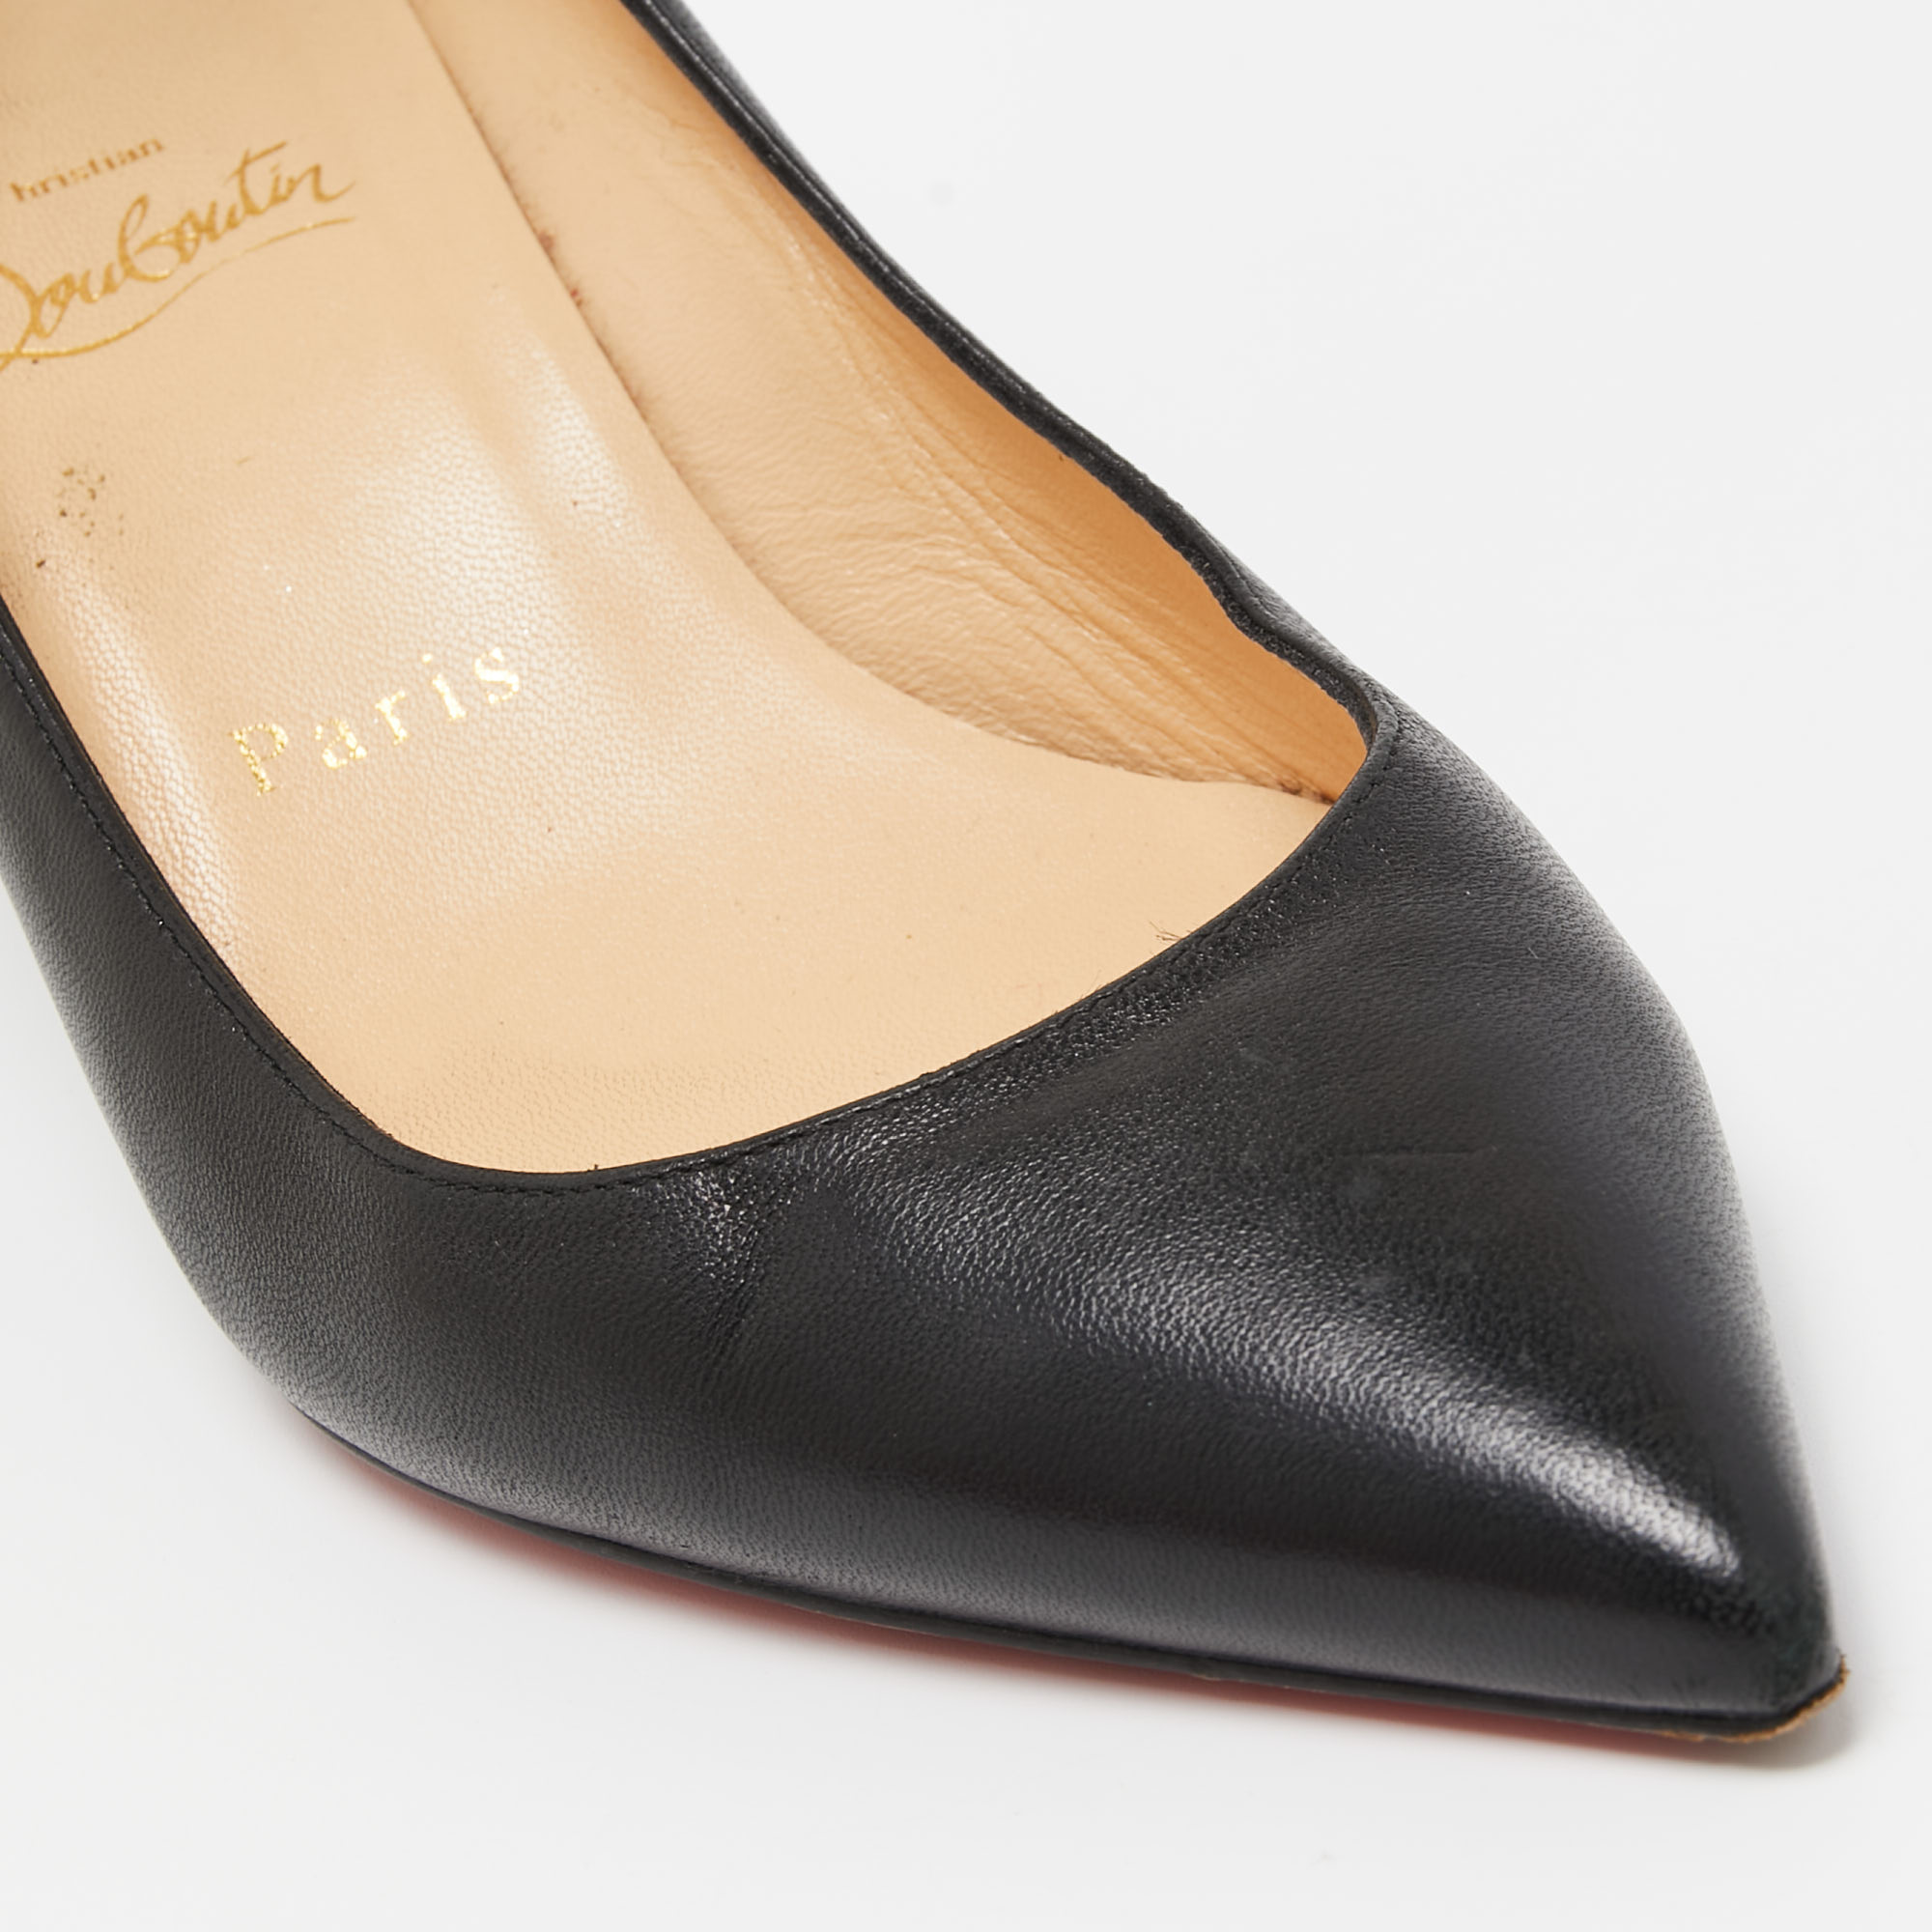 Christian Louboutin Black Leather Pointed Toe Wedge Pumps Size 37.5